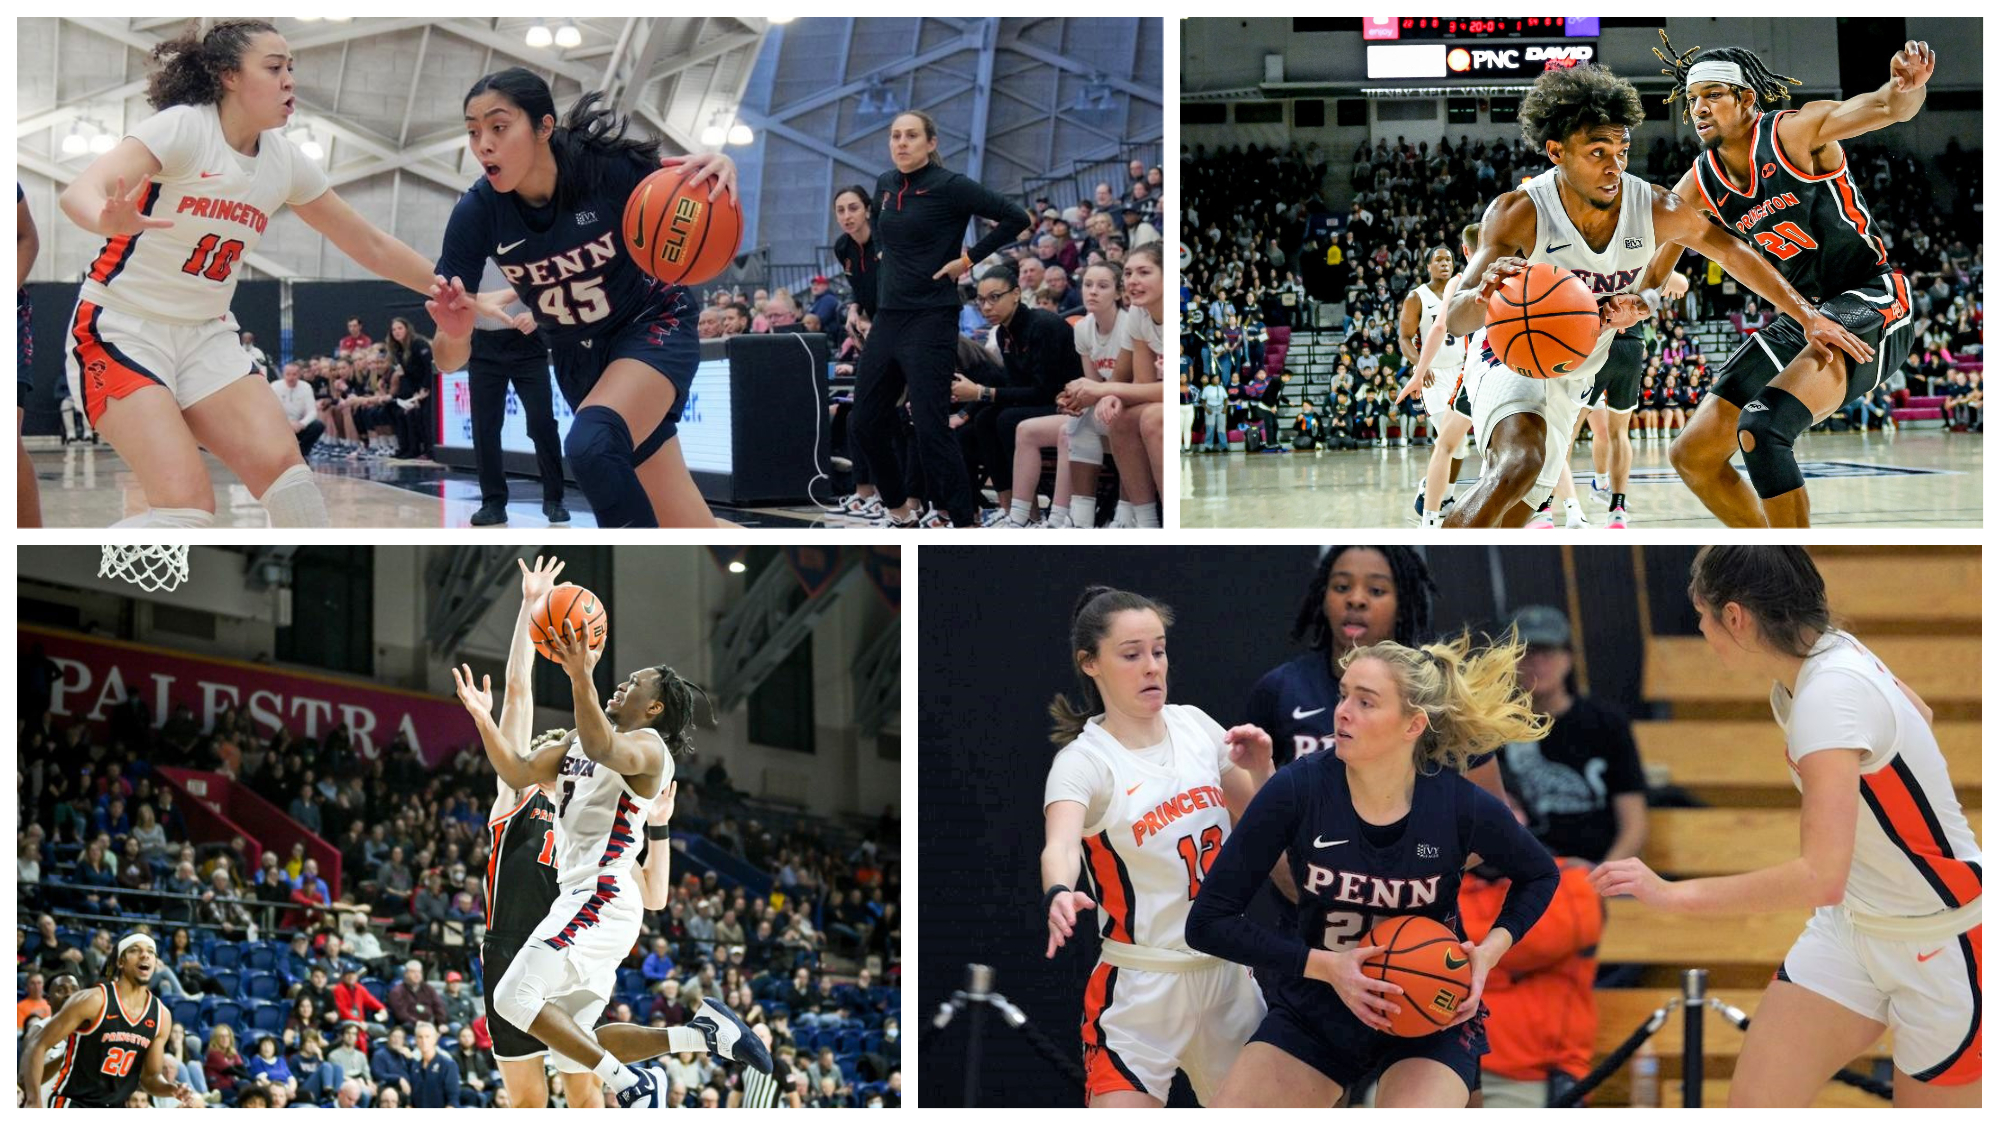 photo grid of Padilla driving to the basket, Monroe dribbling to the basket, Dingle going up for a layup, and a women's basketball player protecting the ball in her hands.